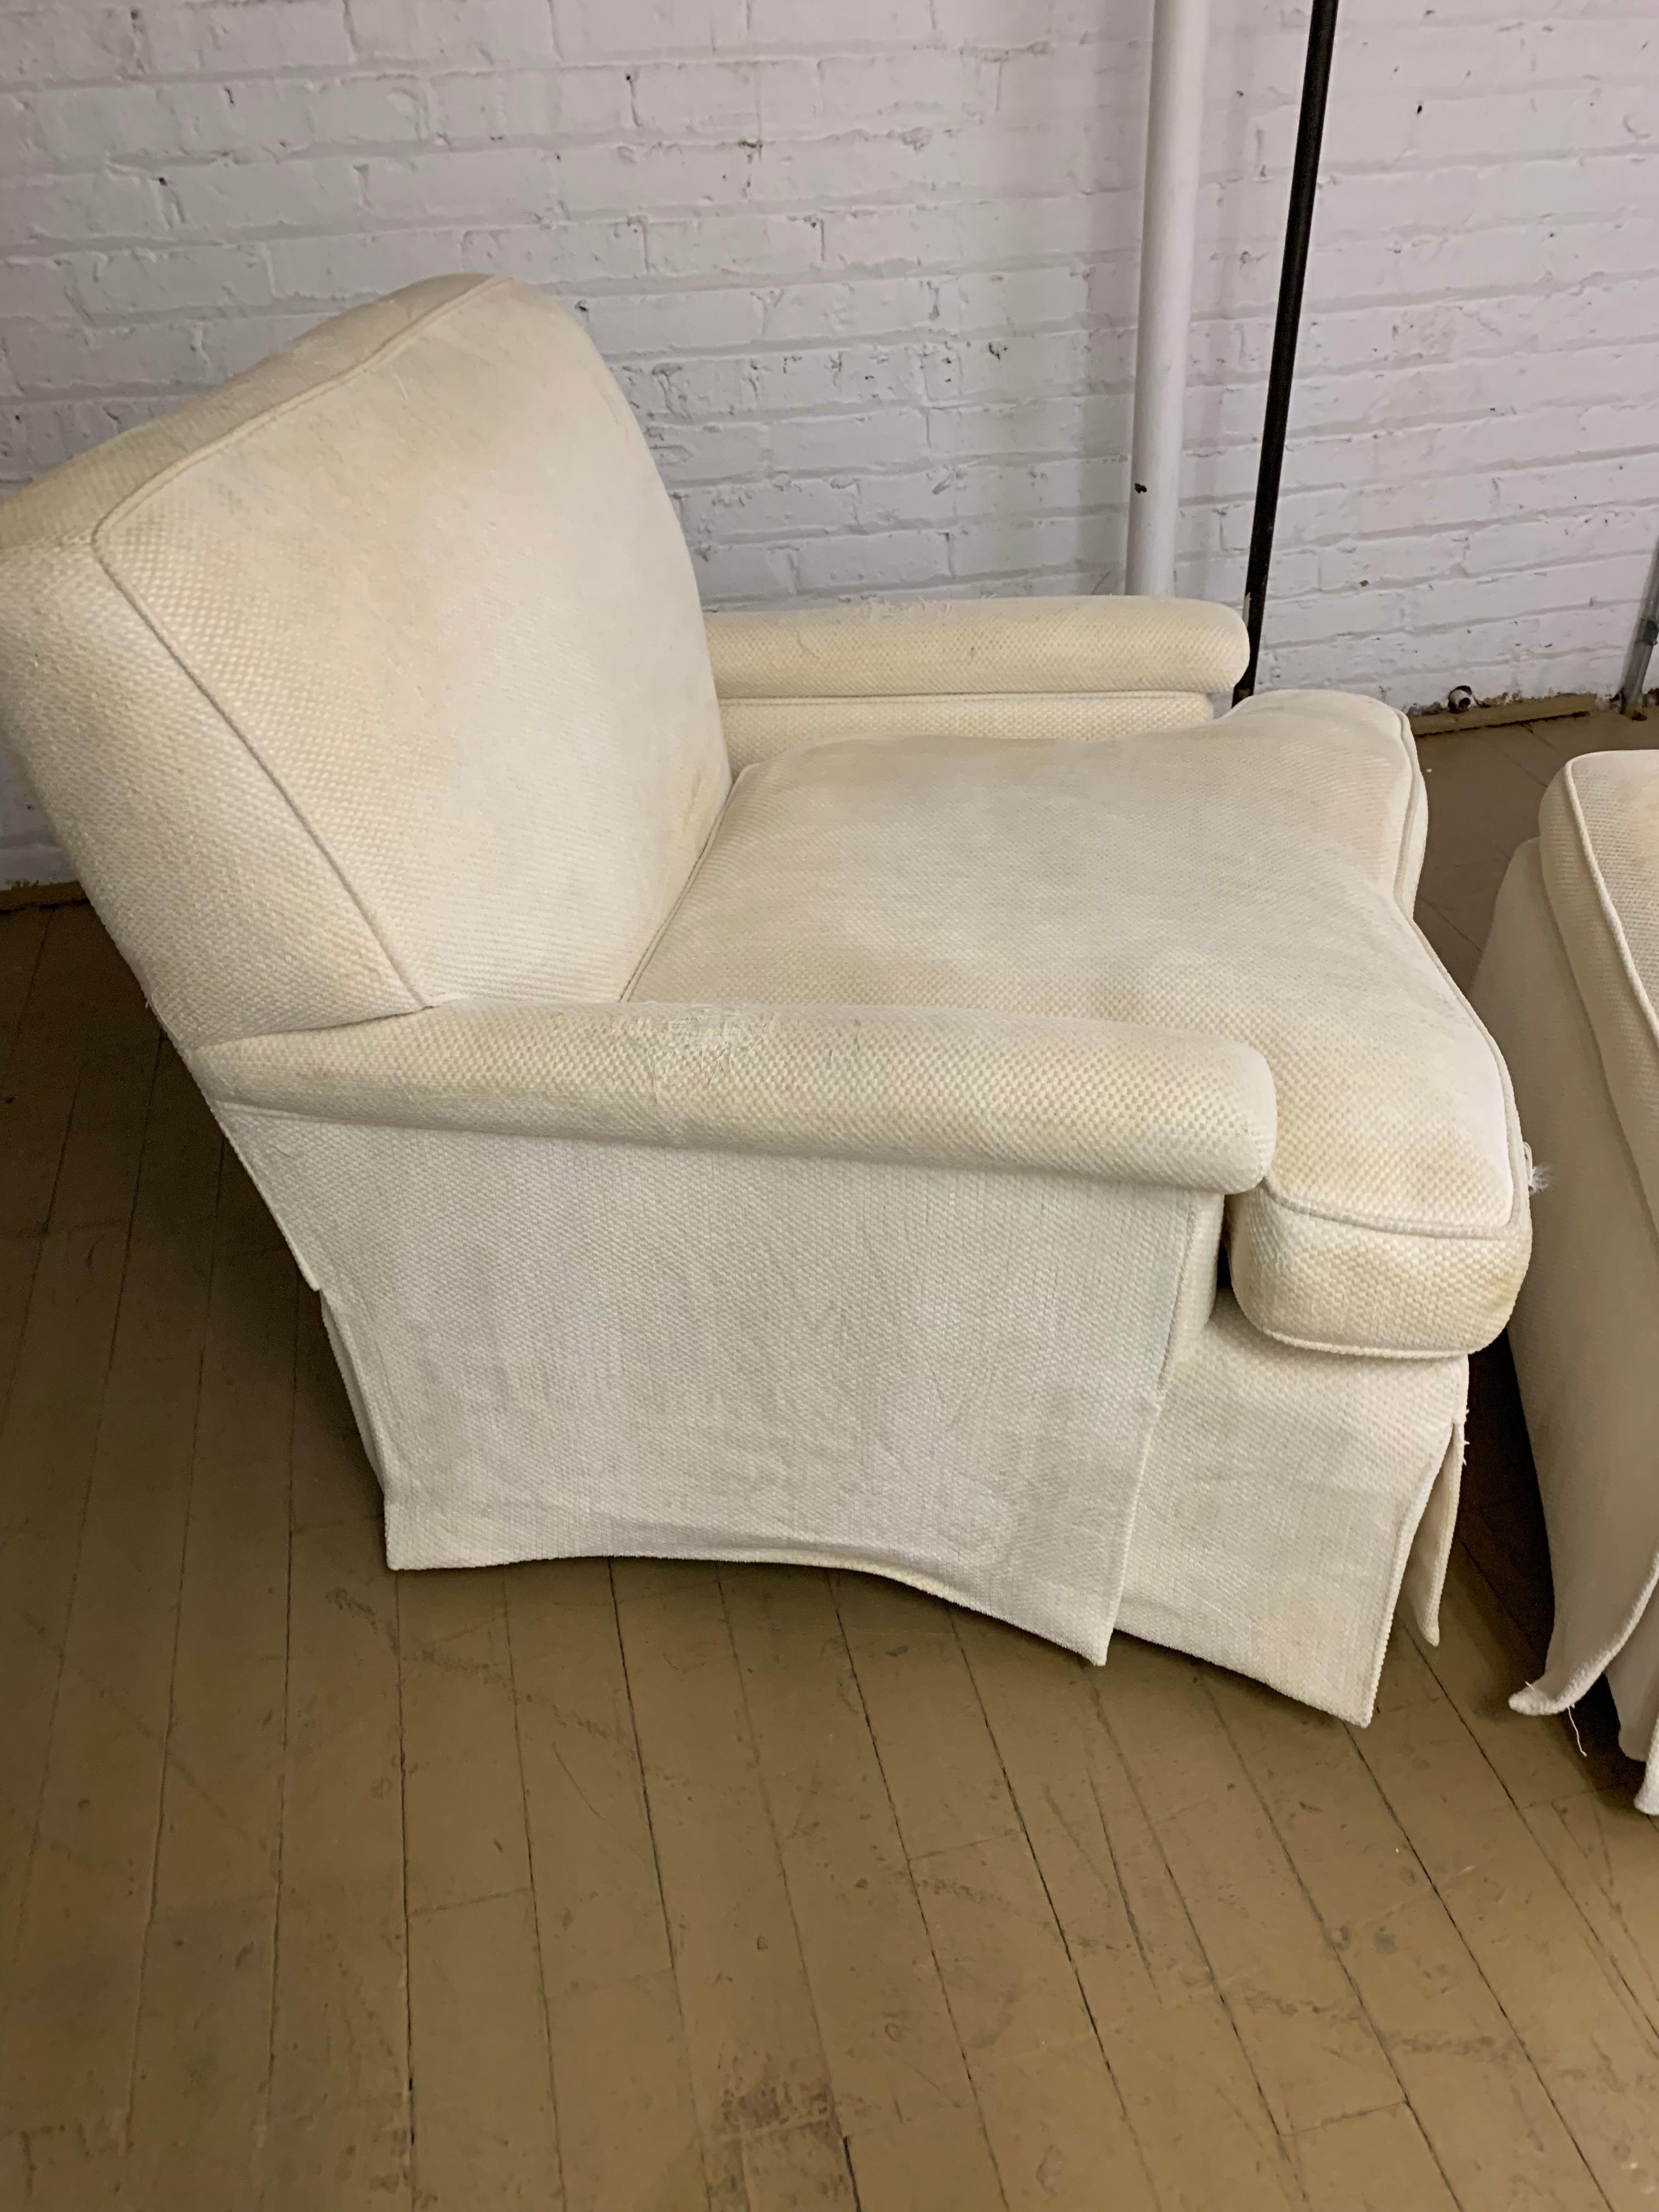 Midcentury baker armchair and ottoman 
Our living room furniture from our childhood home included this Upholstered armchair and ottoman - along with a love seat and sofa of the same aesthetic 
upholstery is white cotton blend and needs a good